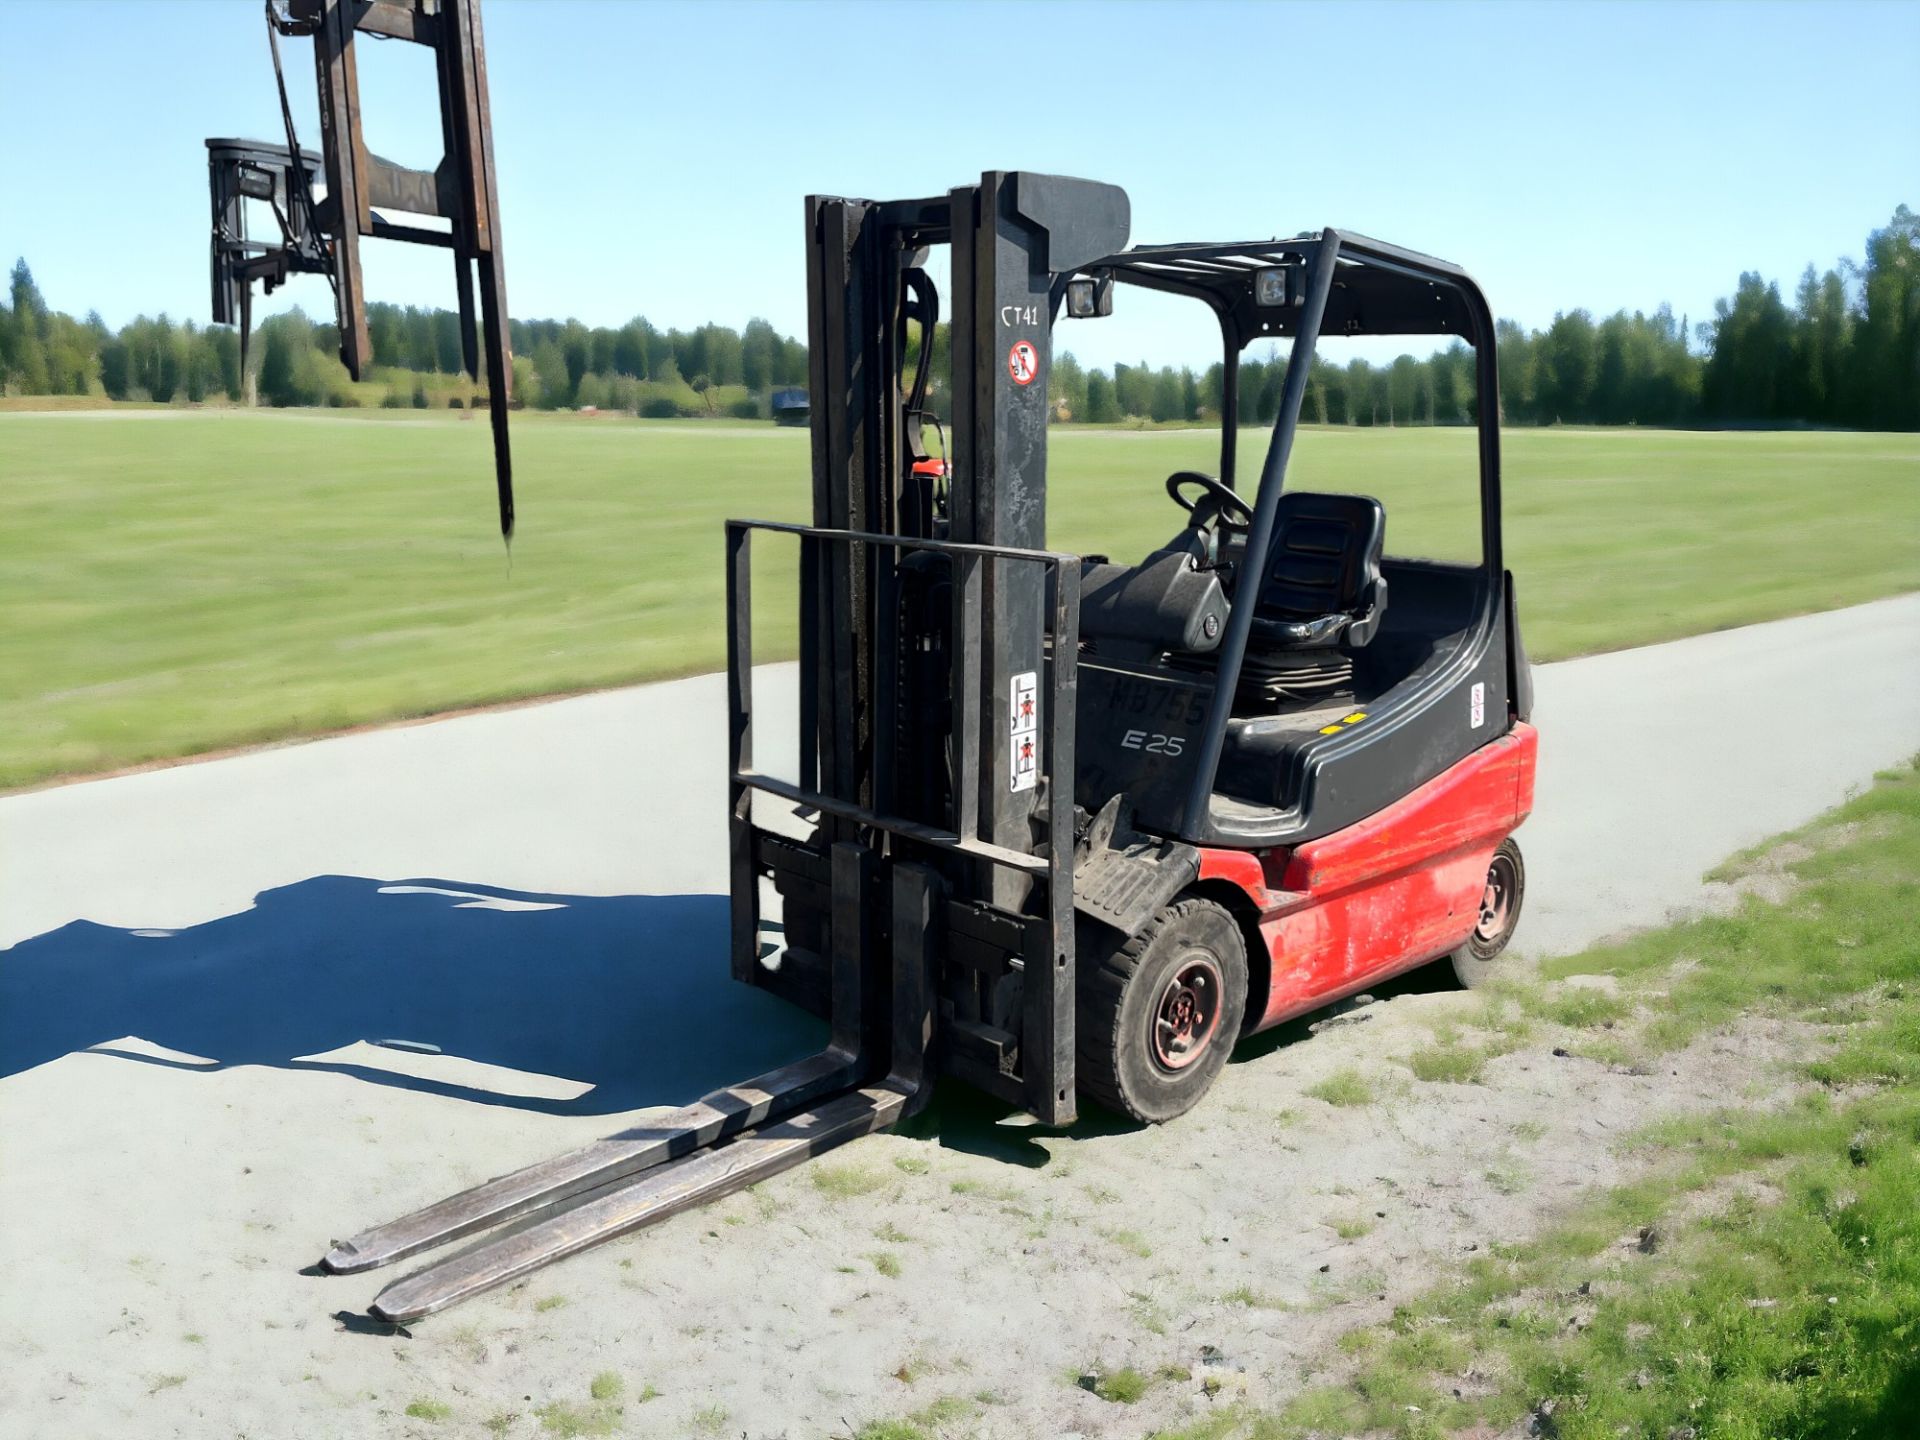 LINDE ELECTRIC 4-WHEEL FORKLIFT - E25-01 (1996) **(INCLUDES CHARGER)** - Image 2 of 6